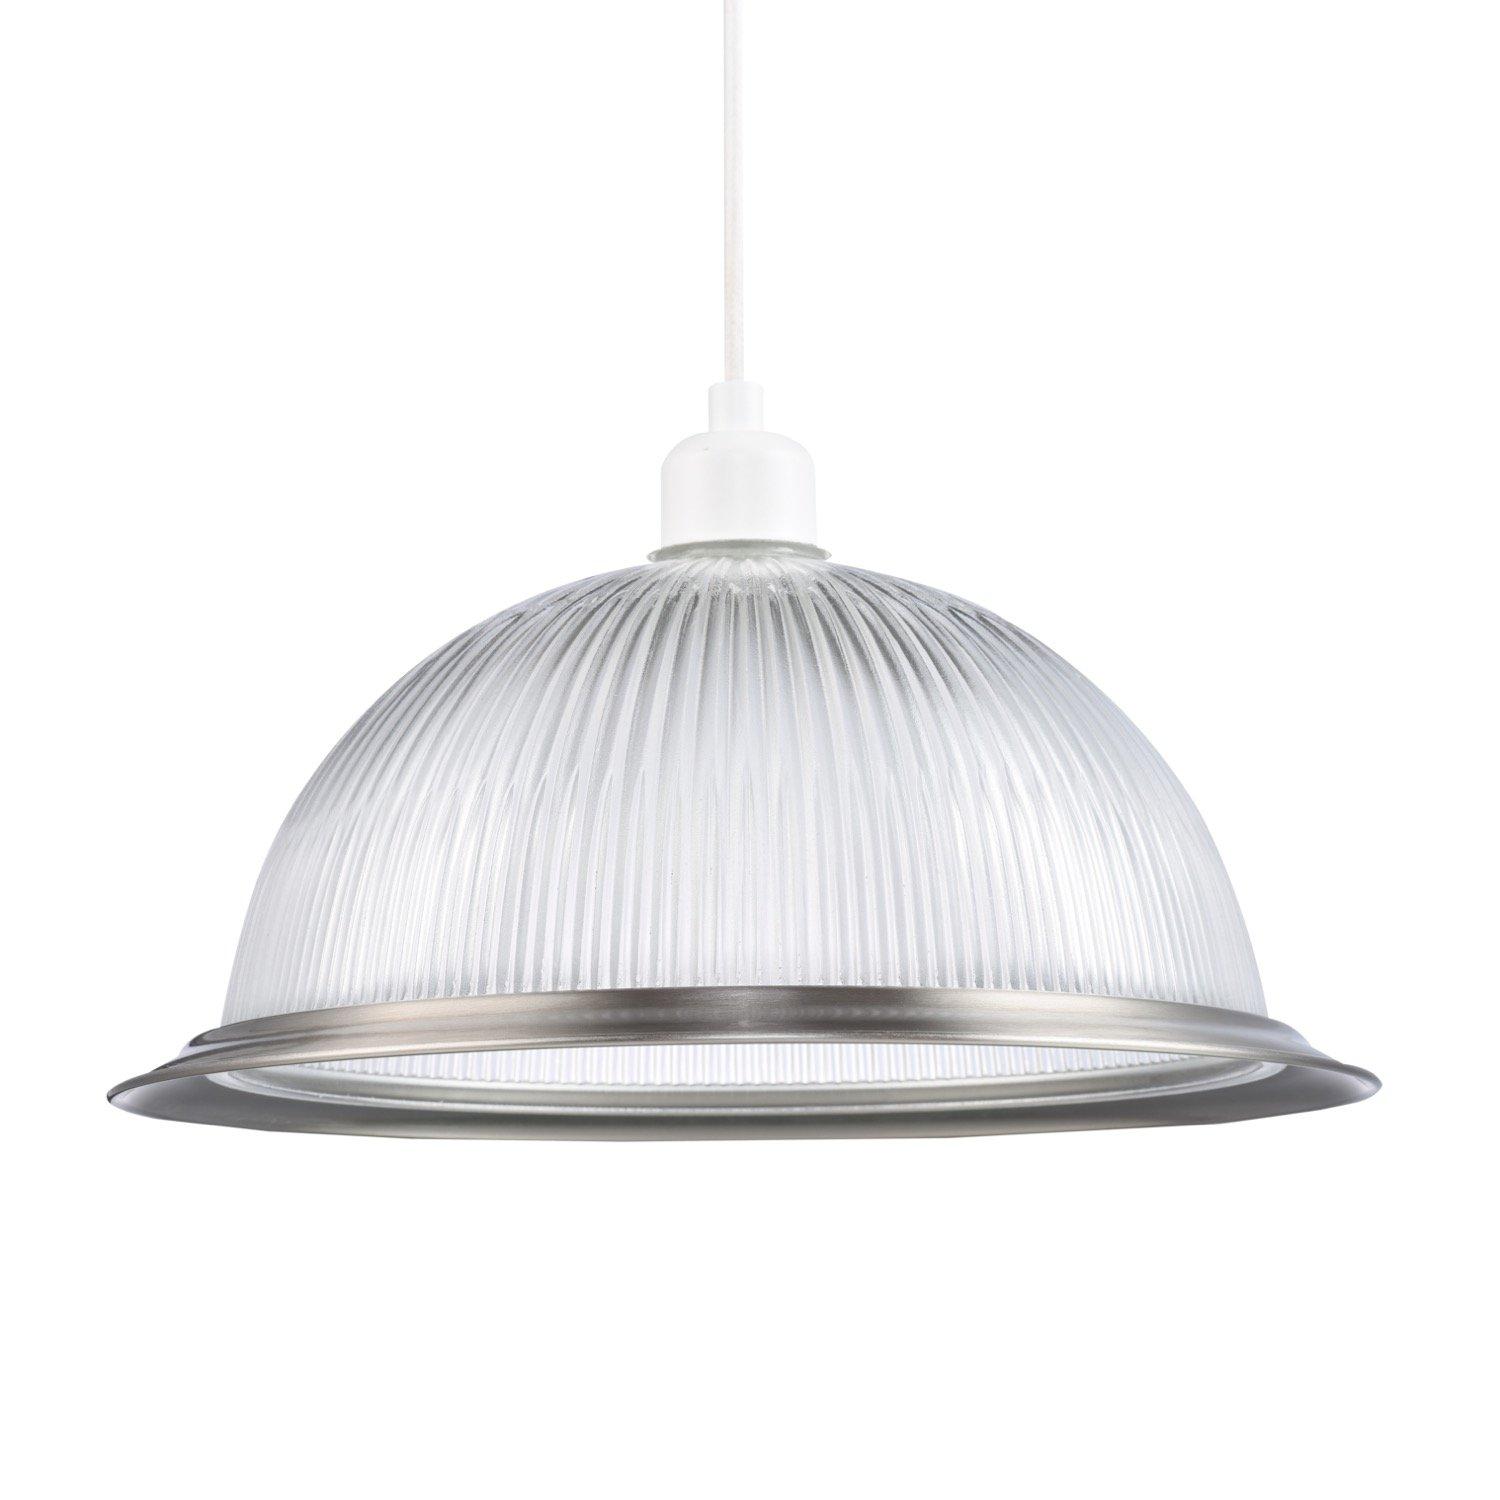 Traditional Classic American Diner Pendant Shade with Metal Trim and Ribbed Glass